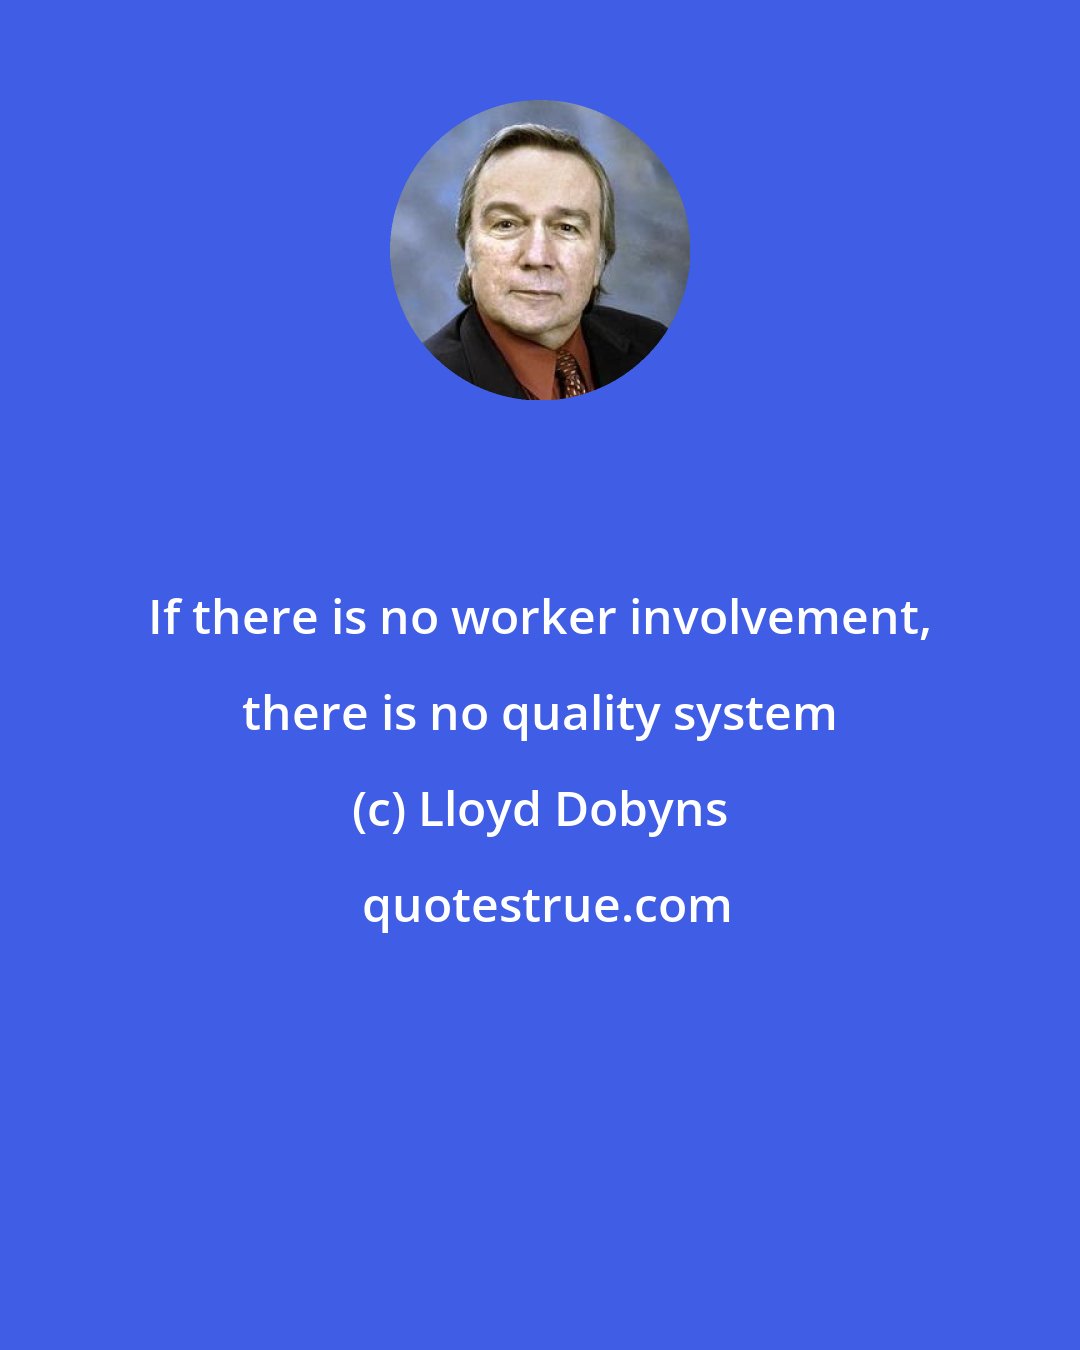 Lloyd Dobyns: If there is no worker involvement, there is no quality system